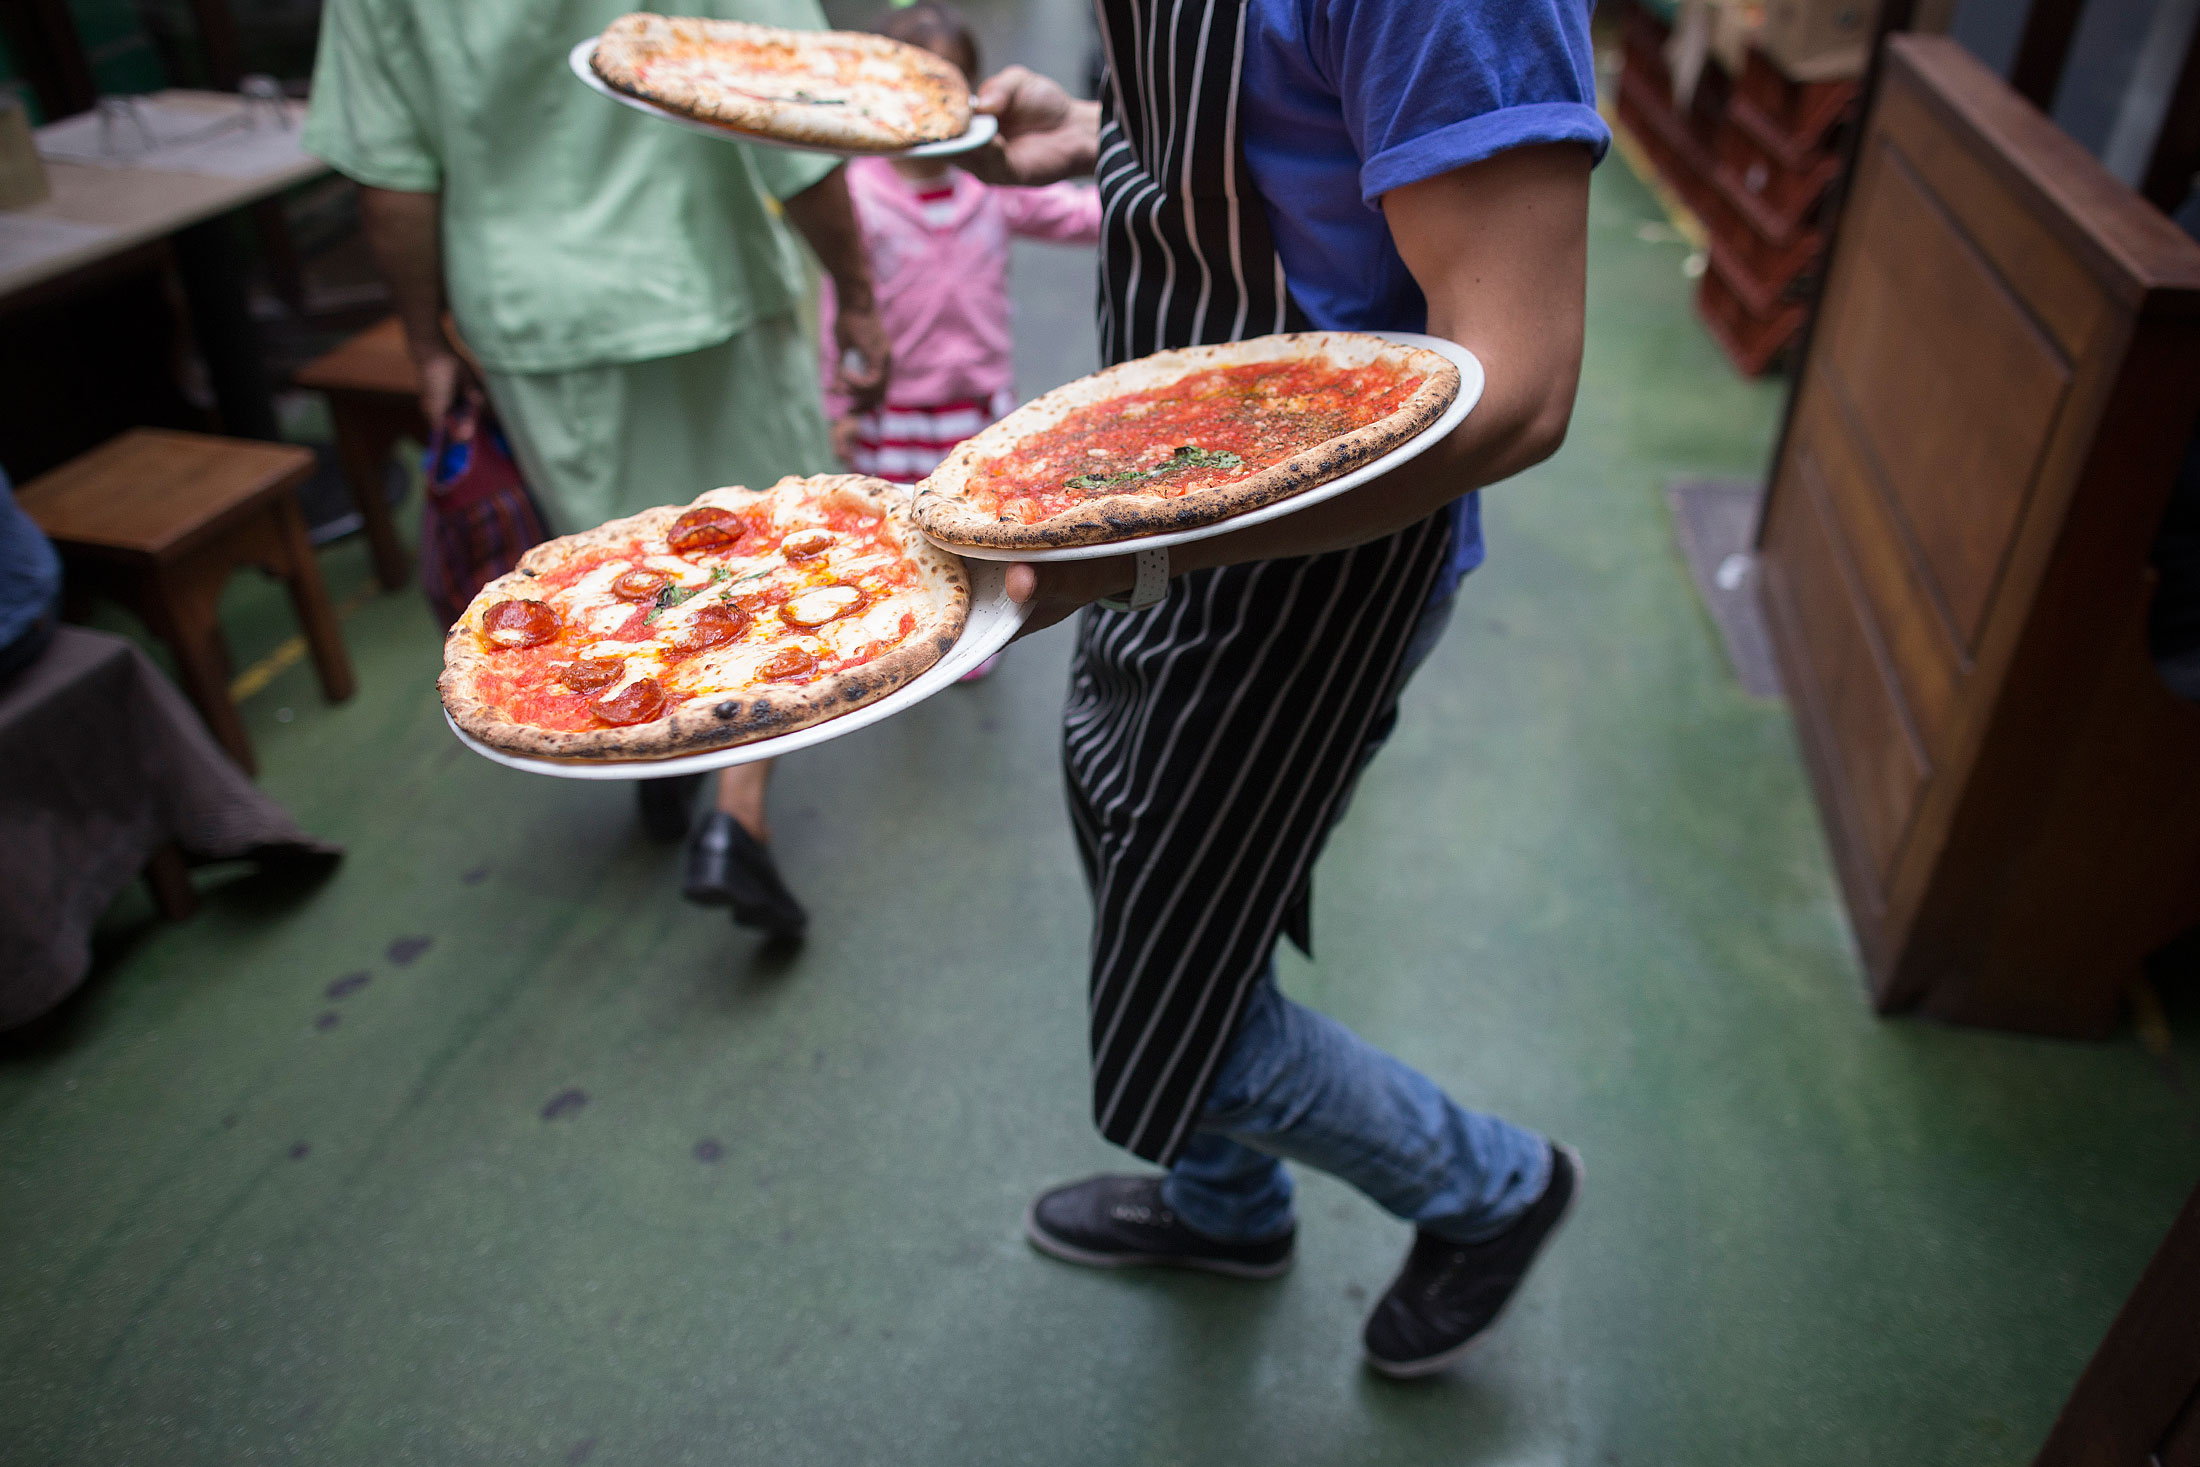 A waiter carries pizzas to customers in a restaurant in Brixton Village, in London, U.K., on Wednesday, Aug. 14, 2013. U.K. services growth accelerated more than economists forecast last month to the fastest pace in more than six years, adding to evidence Britain's economic recovery is gathering momentum.
